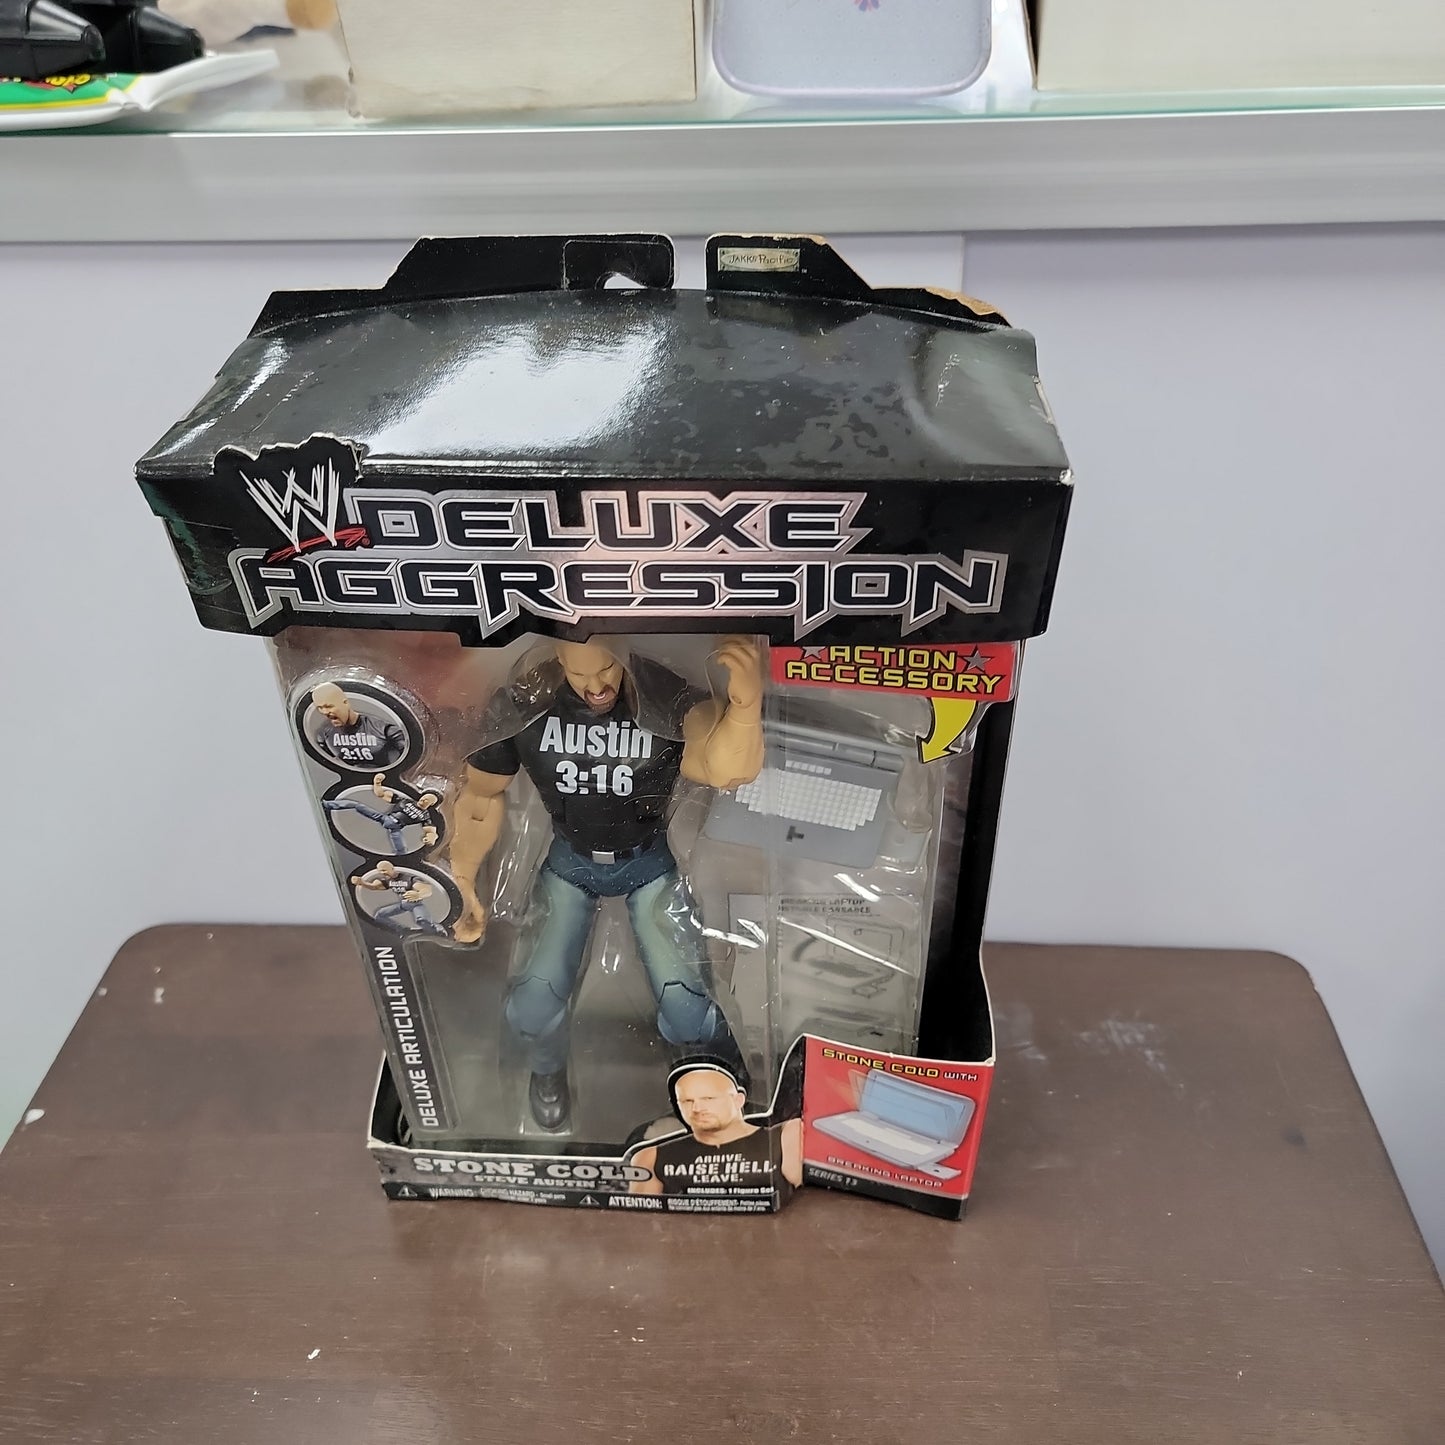 WWE Deluxe Aggression Stone Cold Steve Austin Action Figure